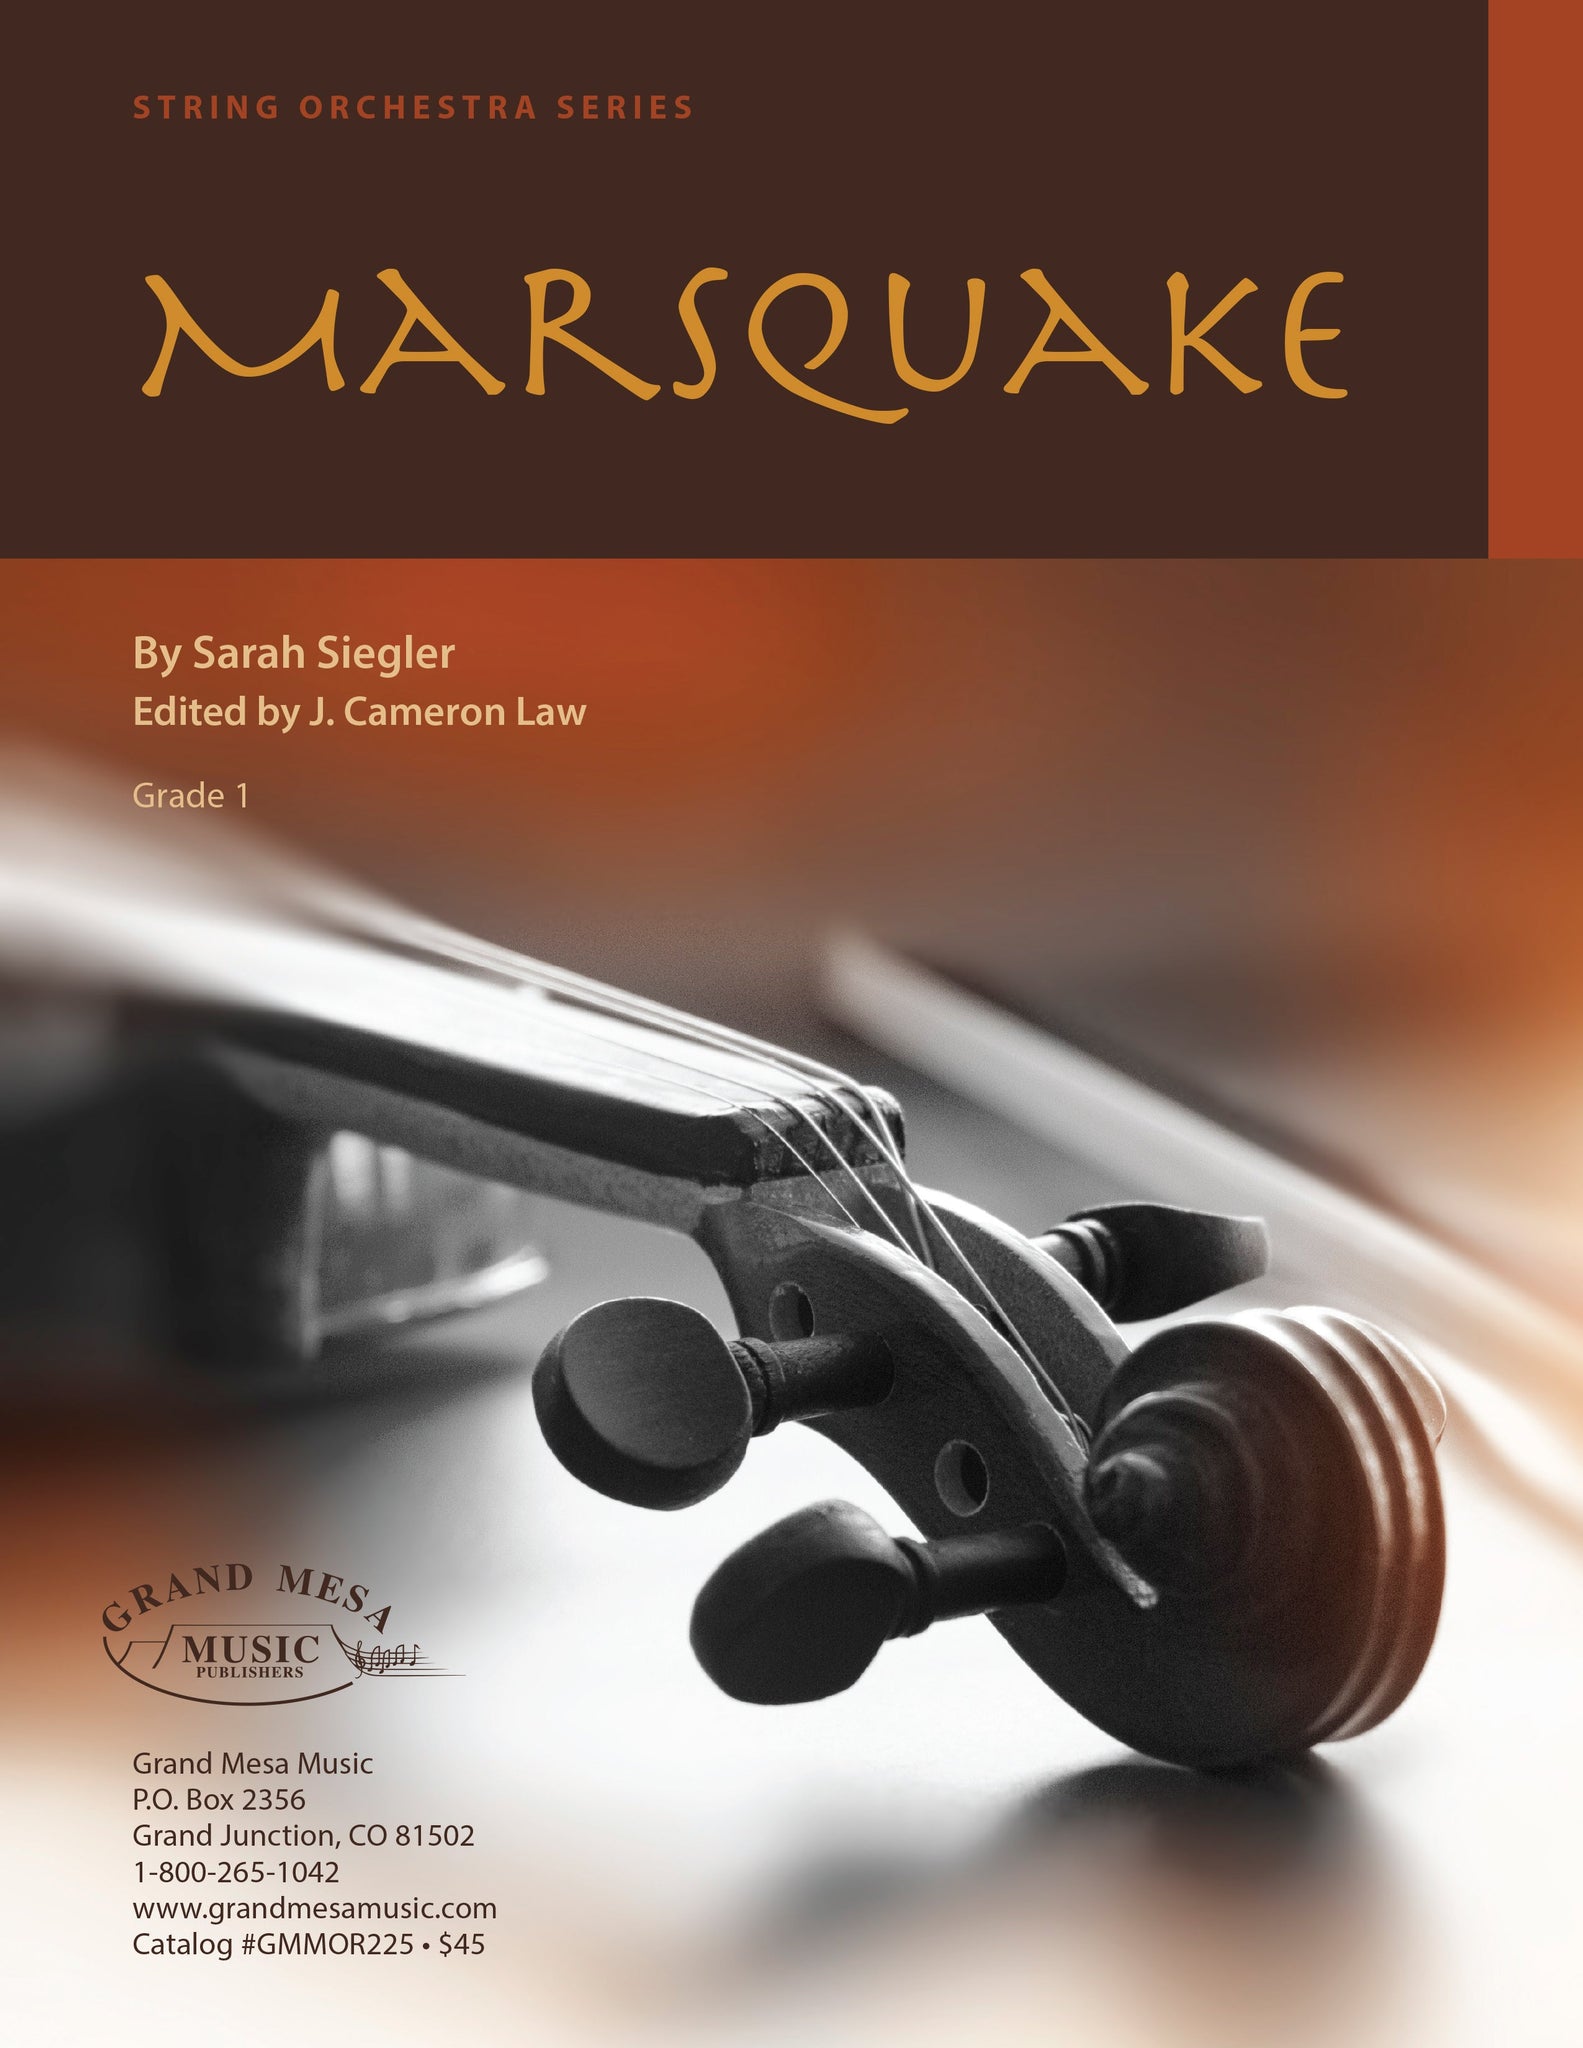 Strings sheet music cover of Marsquake, composed by Sarah Siegler.